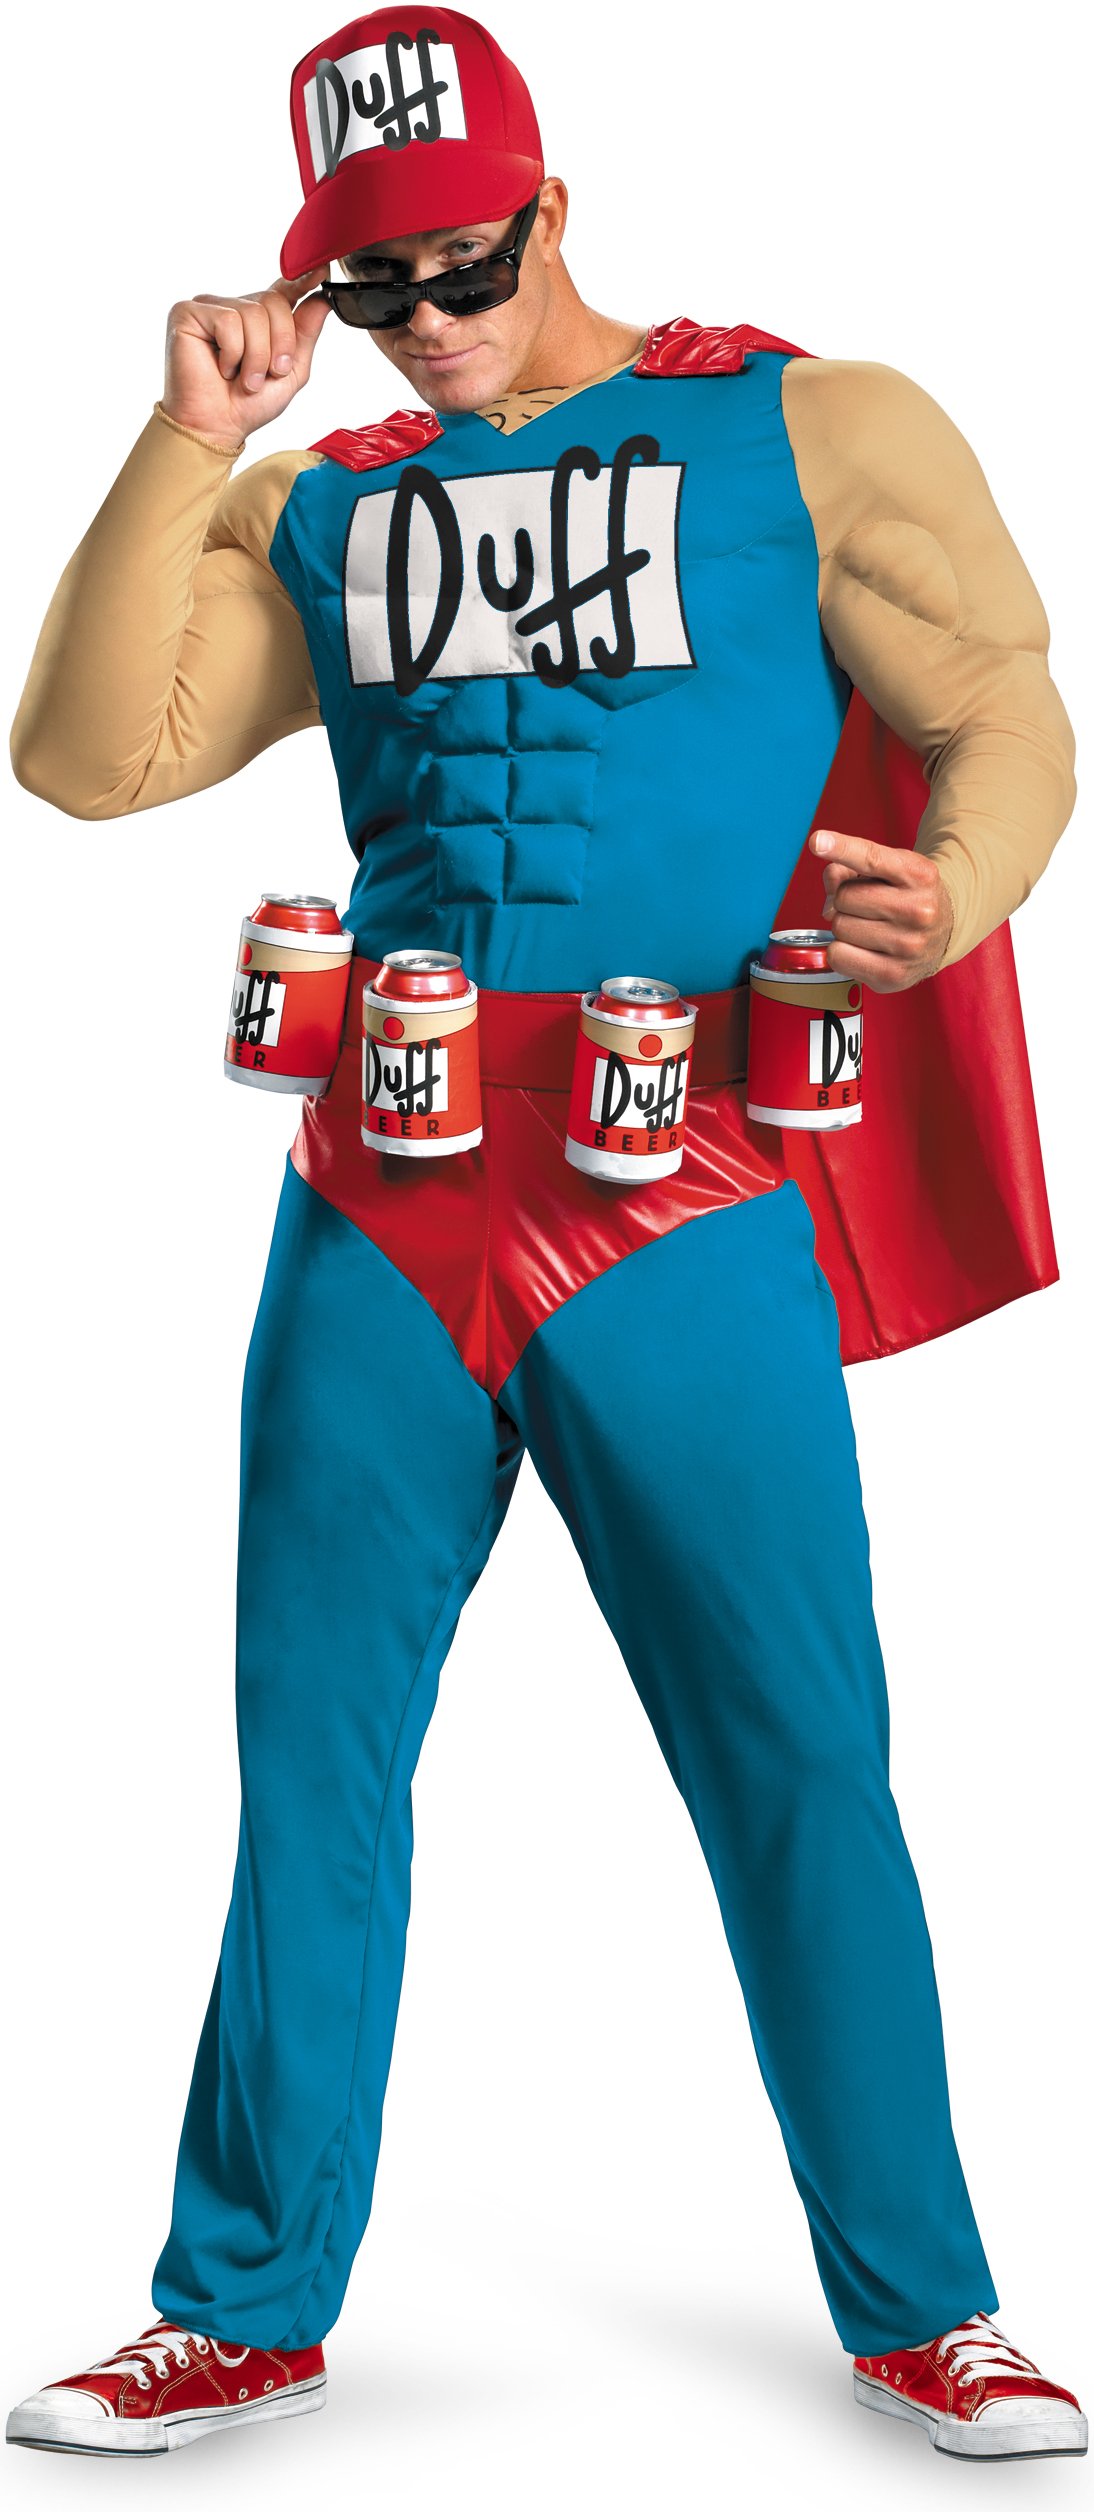 The Simpsons - Duffman Classic Muscle Adult Costume